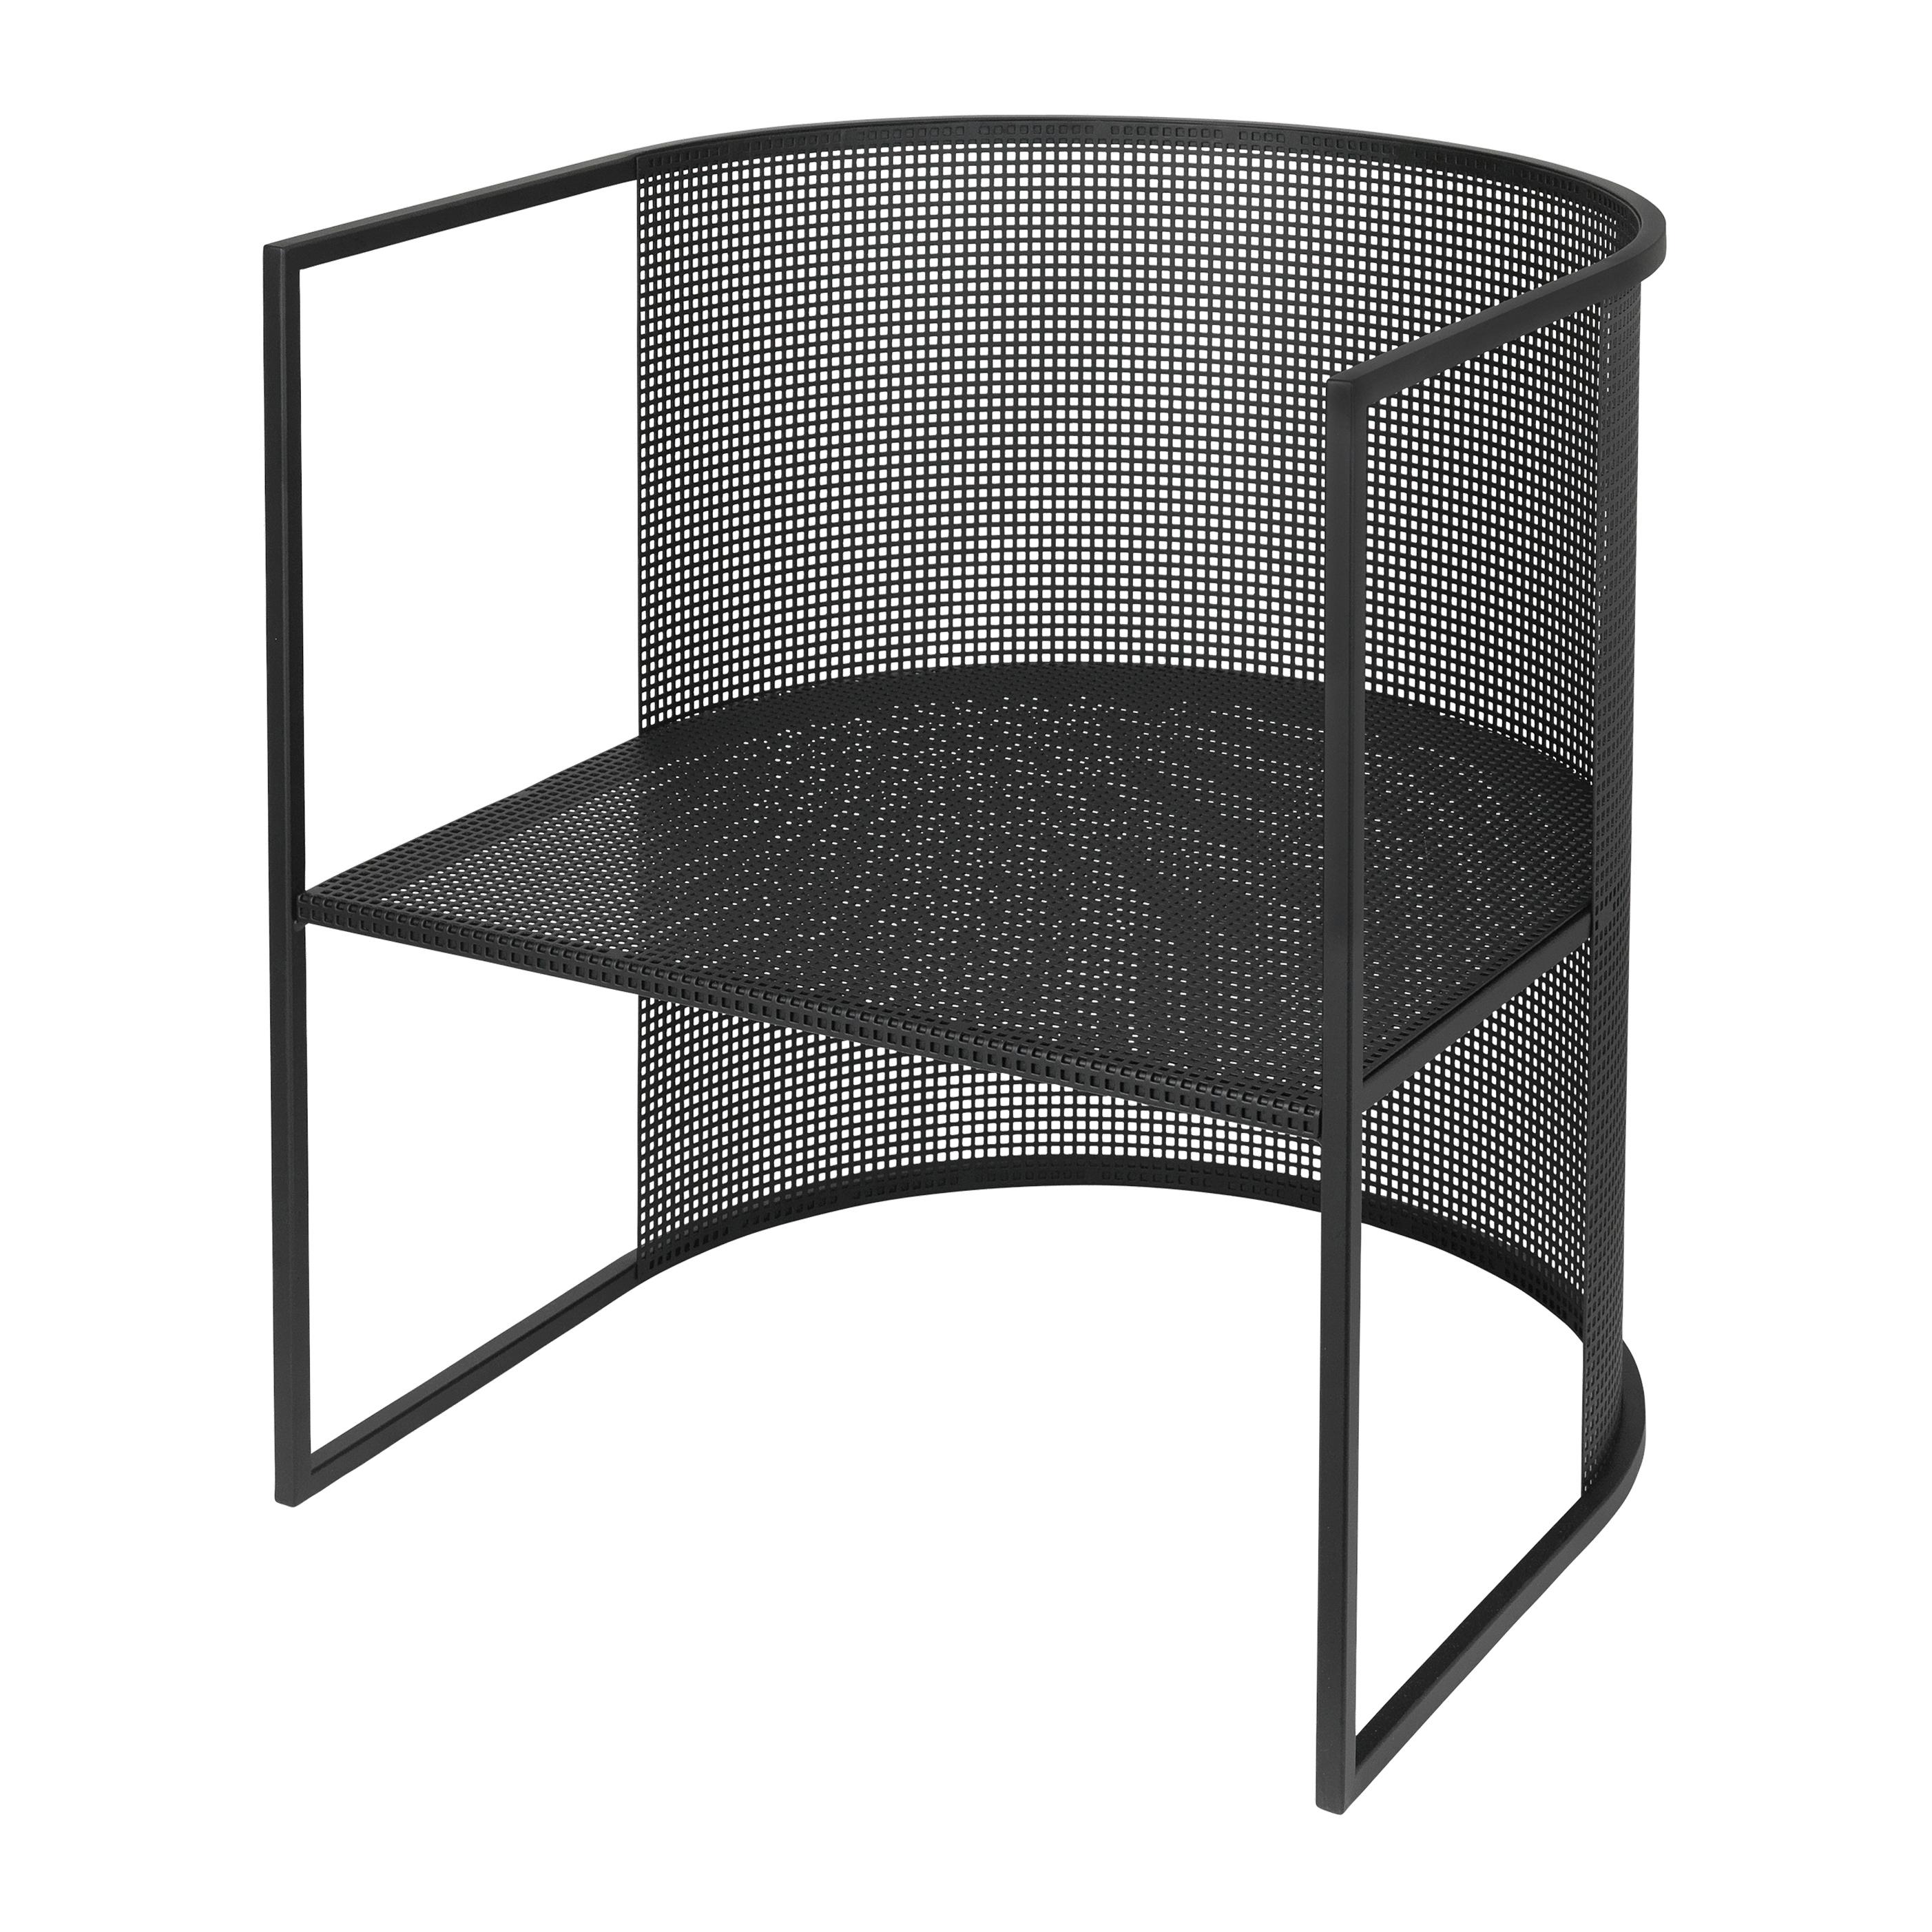 Black steel Bahaus lounge chair by Kristina Dam Studio
Materials: Black outdoor powder-coated steel
Dimensions: 67 x 63 x 64 cm

*Safe to use outdoor.

Kristina Dam graduated from The Royal Danish School of Fine Arts, Architecture and Design in